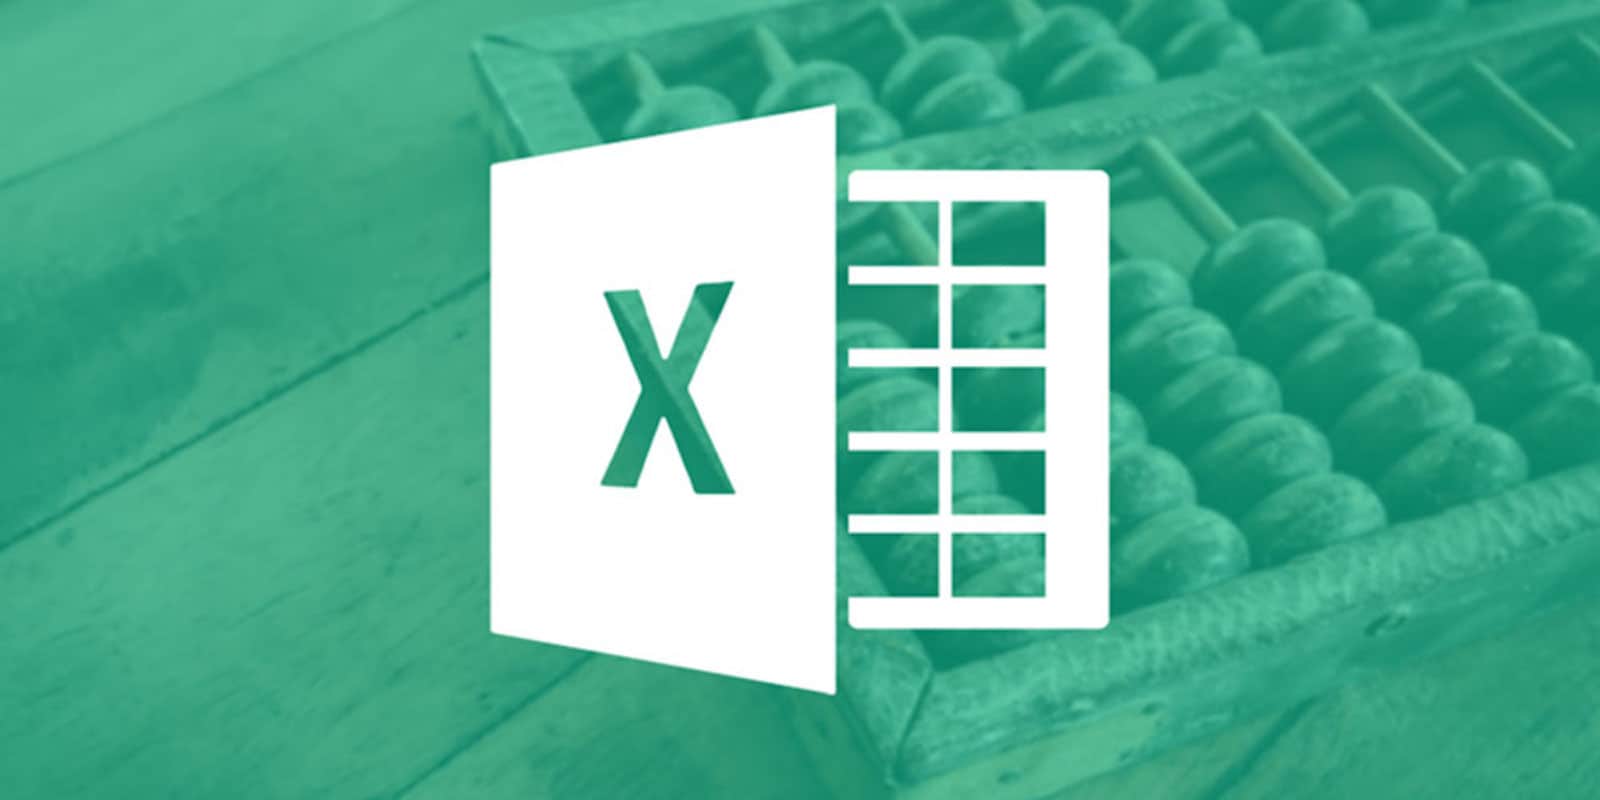 The Ultimate Excel Bootcamp Bundle